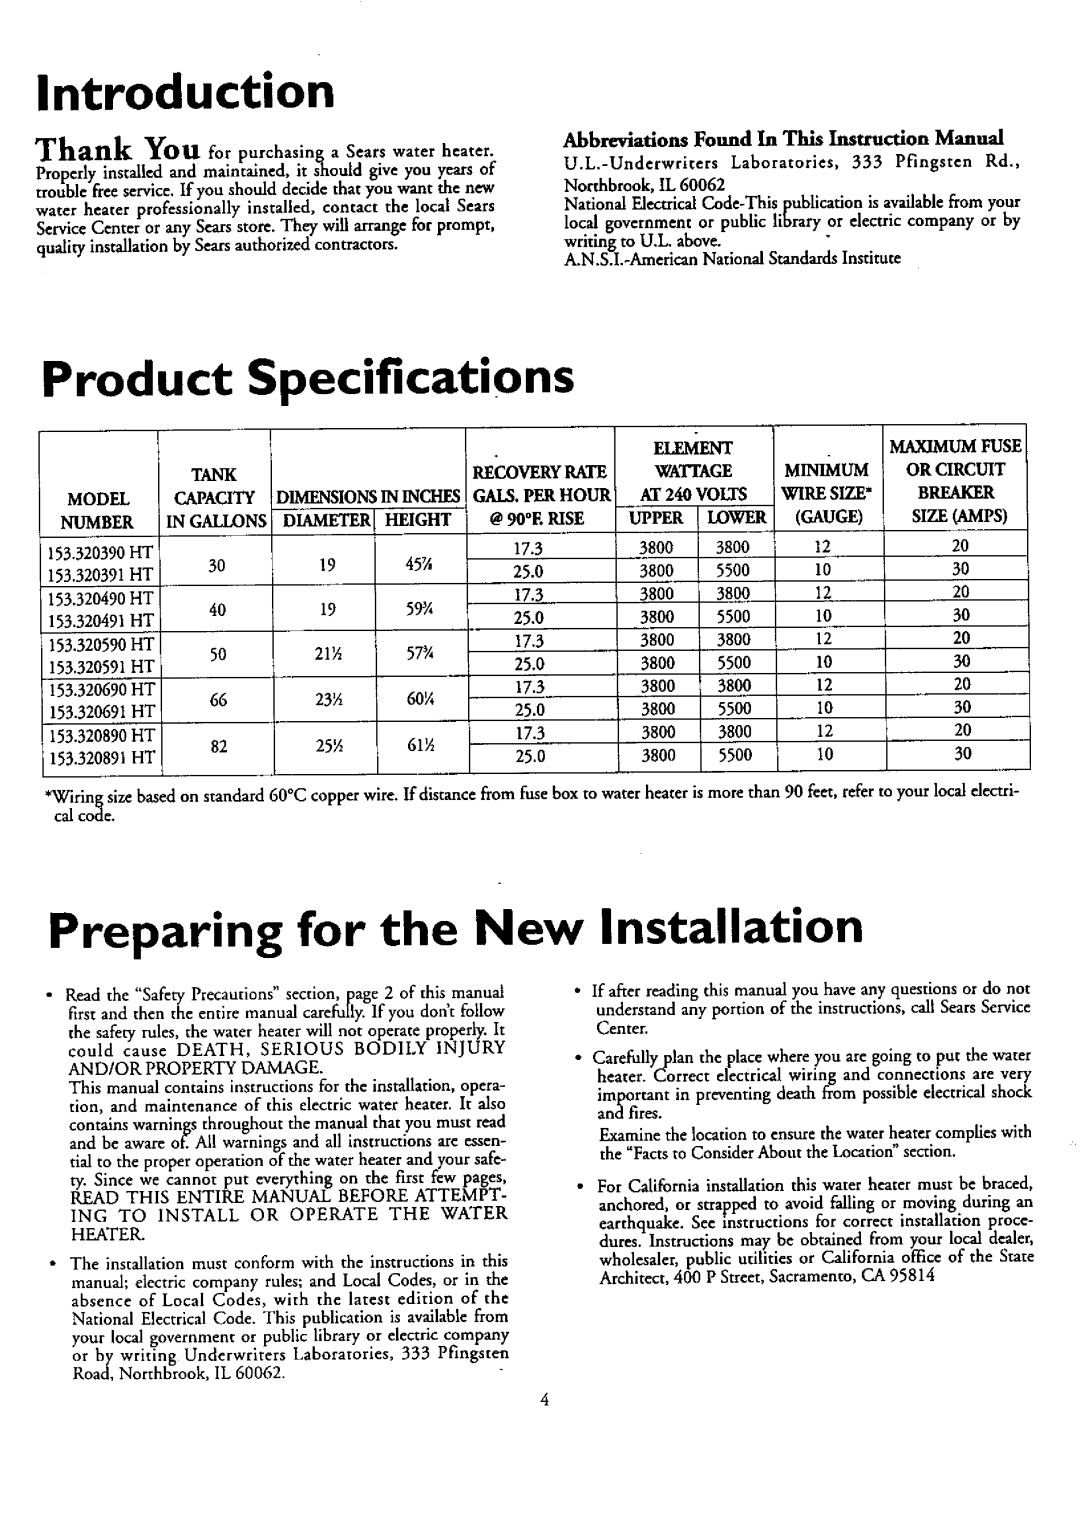 Kenmore 153.320691 HT 66 GAL owner manual Introduction, Product, Preparing for the New Installation, Specifications, Mis Um 